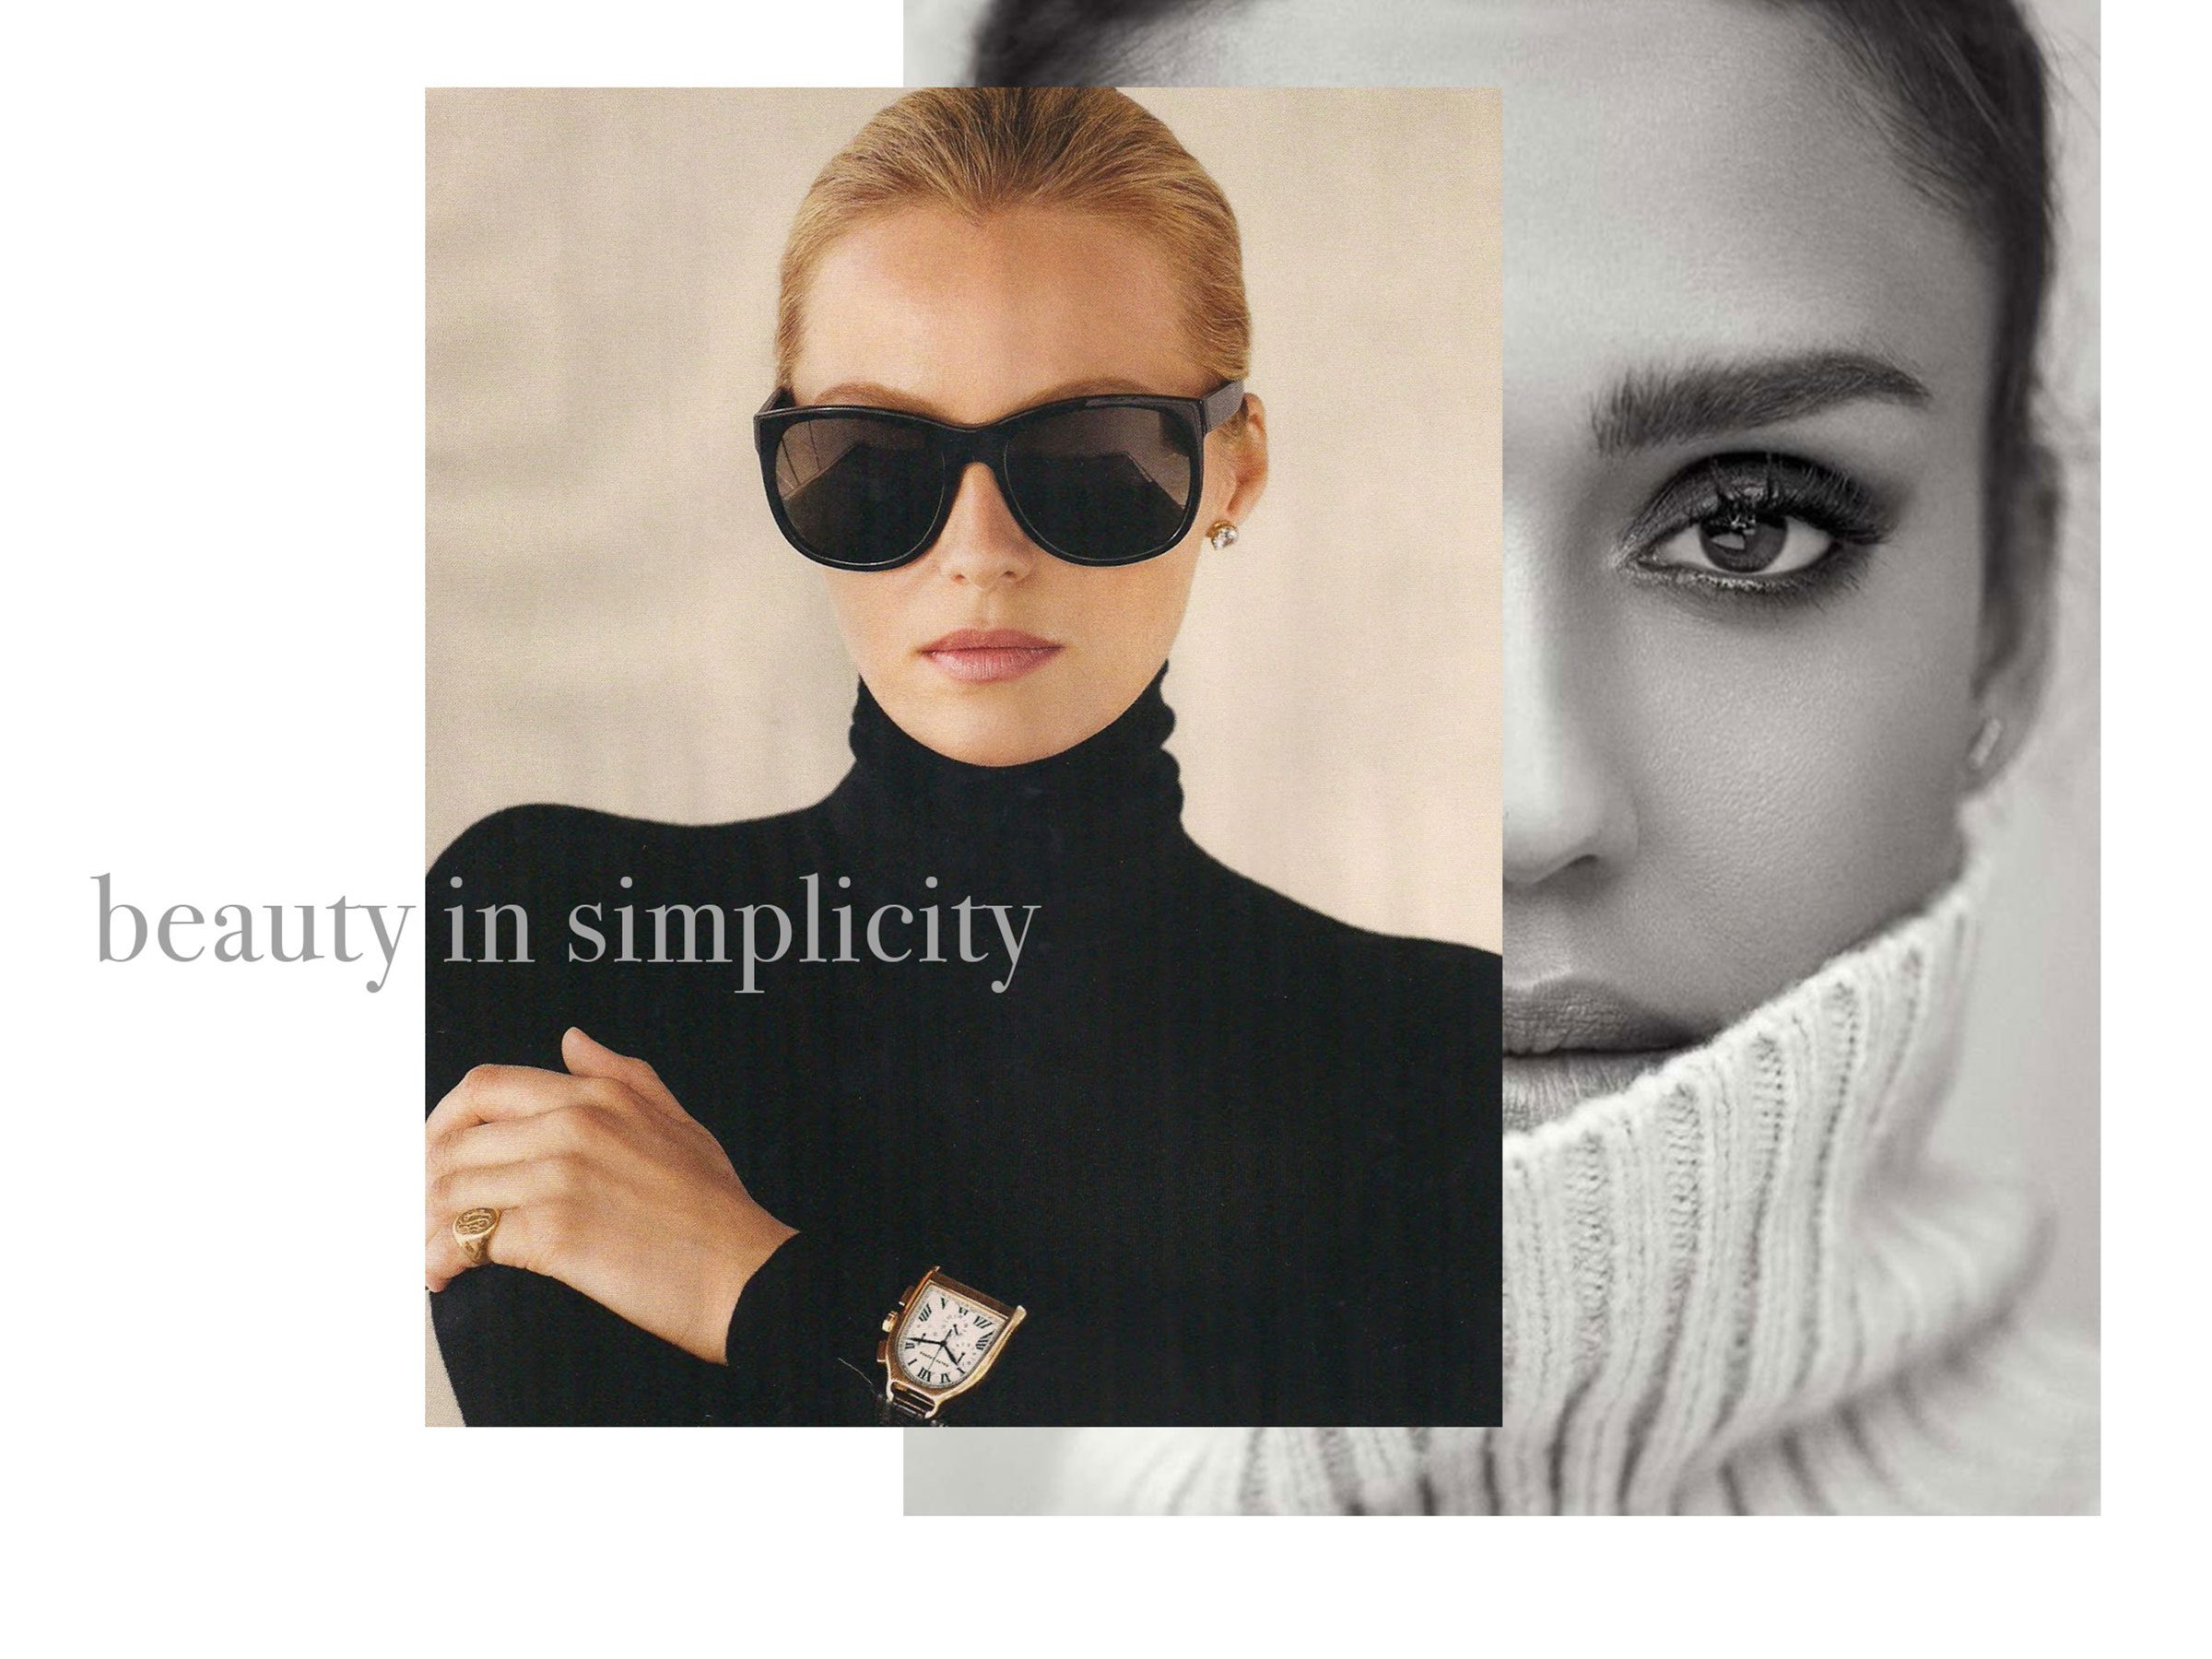 Weekend Wardrobe: The Simplicity of The Turtleneck